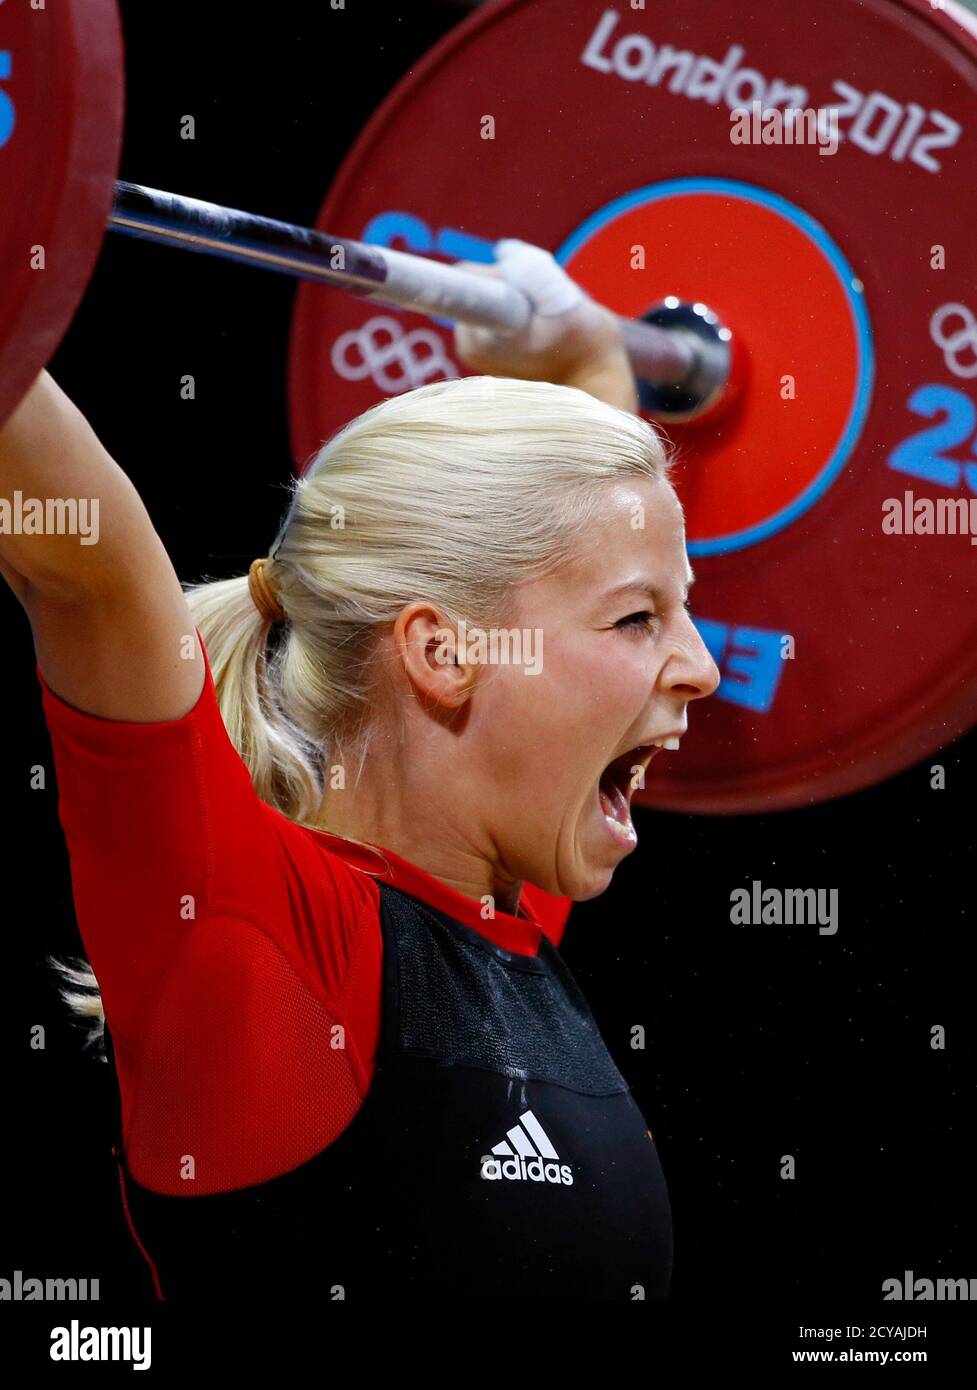 Germany's Julia Rohde competes on the women's 53Kg Group B weightlifting  competition at the London 2012 Olympic Games July 29, 2012. REUTERS/Kai  Pfaffenbach (BRITAIN - Tags: SPORT OLYMPICS SPORT WEIGHTLIFTING Stock Photo  - Alamy